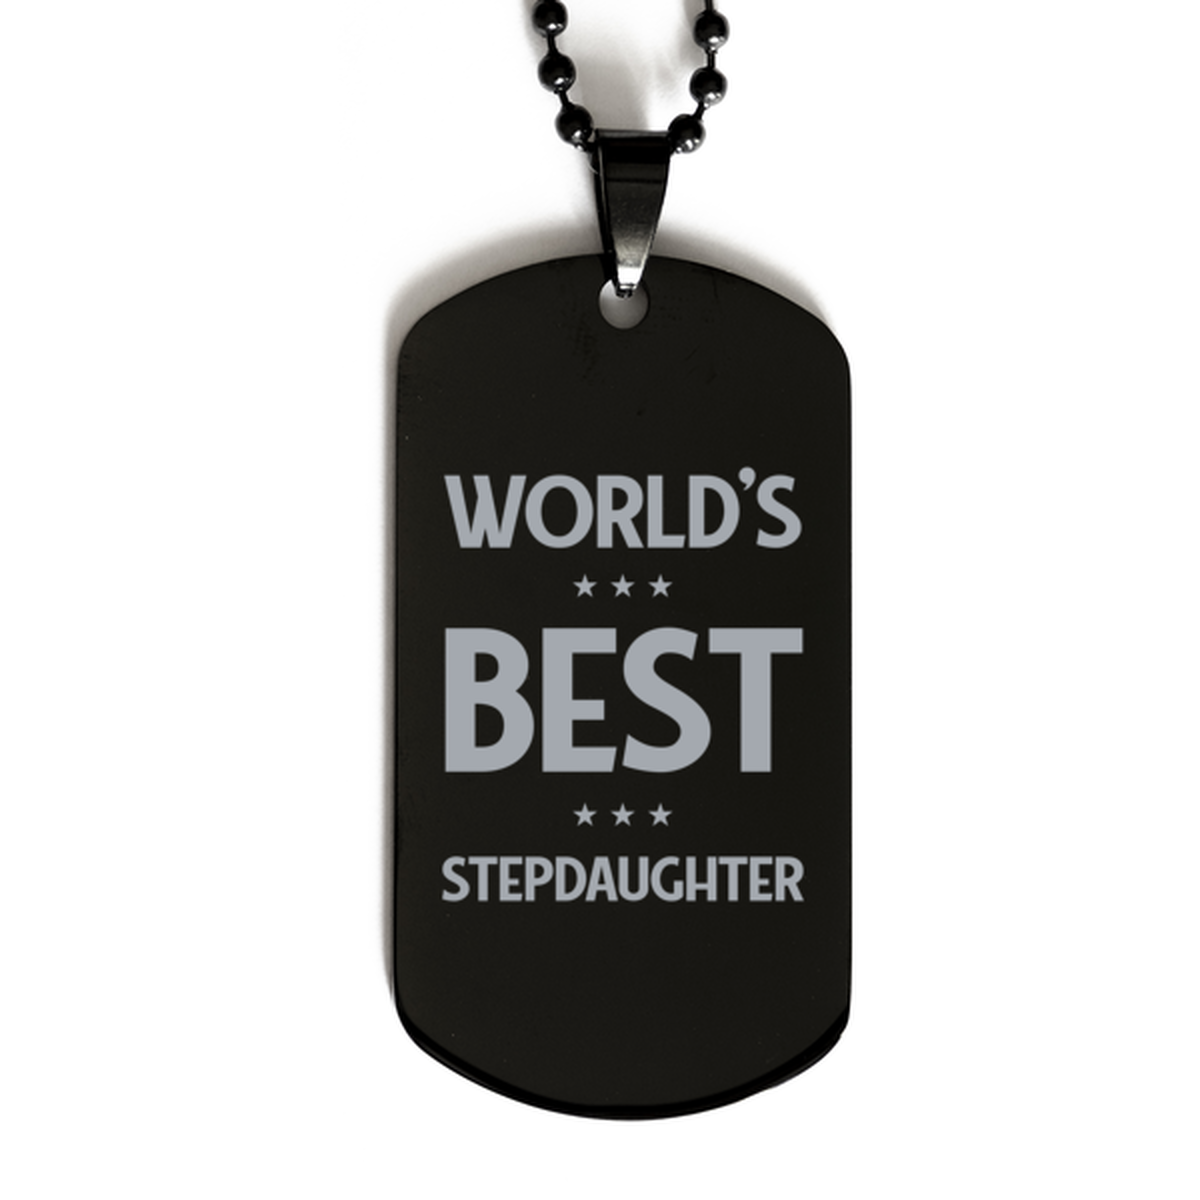 Worlds Best Stepdaughter Gifts, Funny Black Engraved Dog Tag For Stepdaughter, Birthday Presents For Women